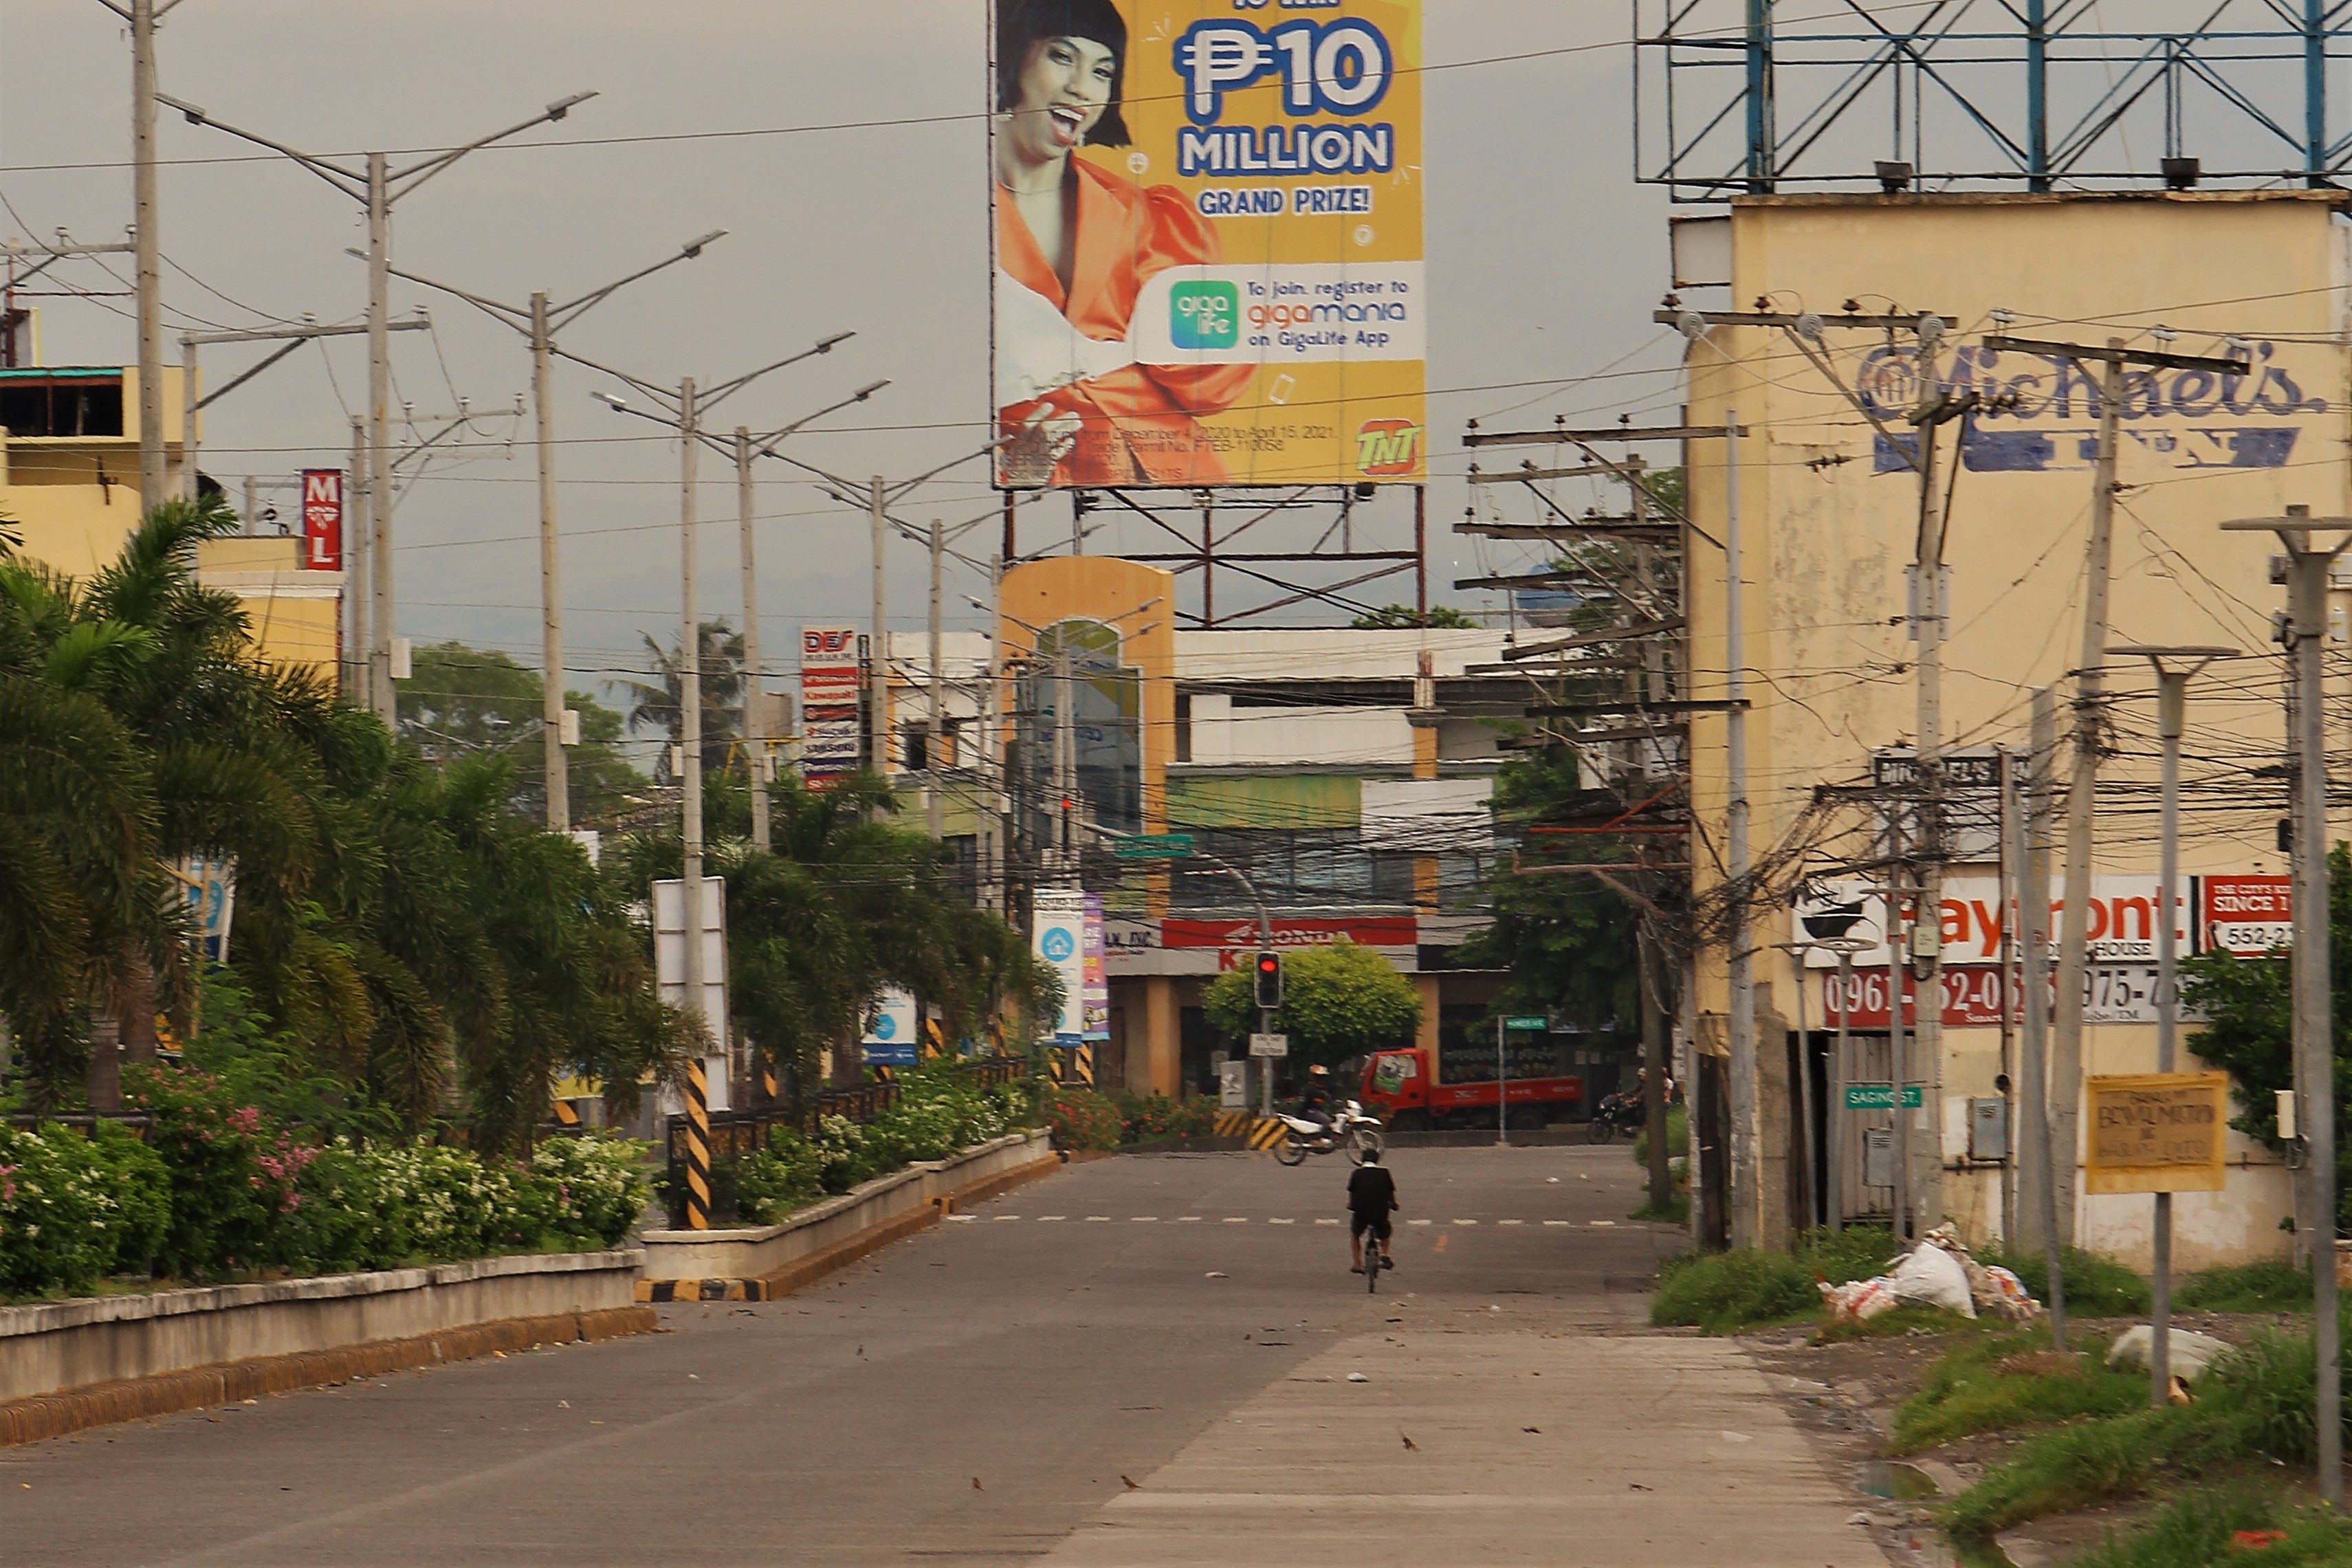 Hotels used for COVID-19 quarantine grumble as General Santos fails to pay up